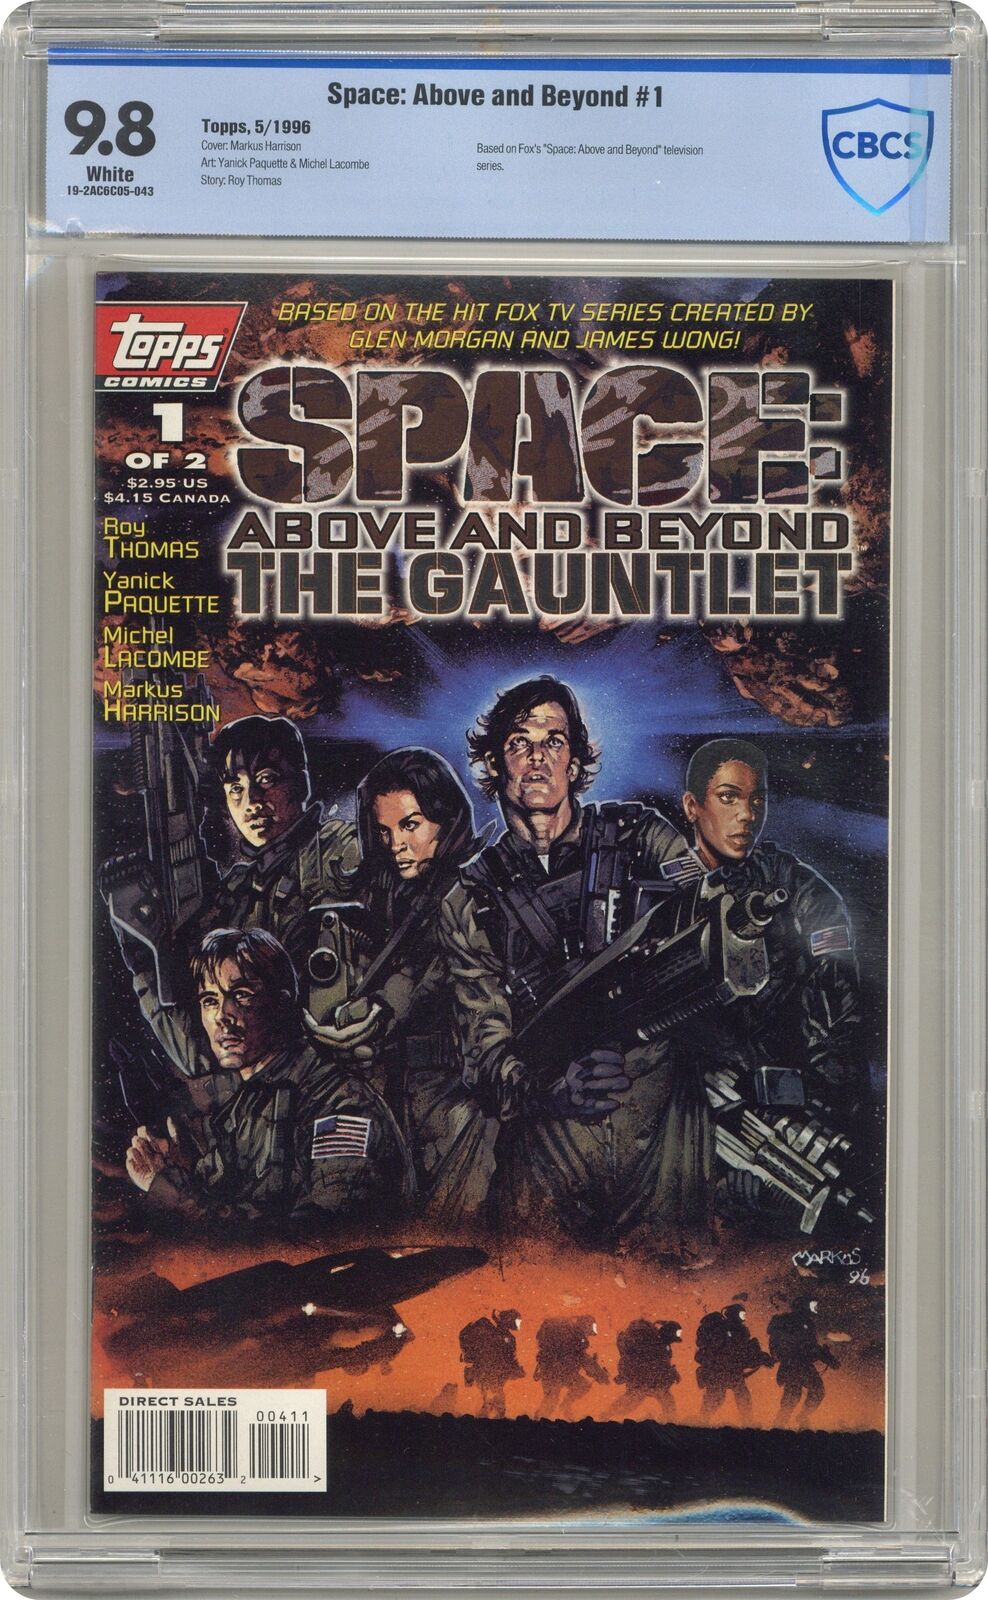 Space Above and Beyond The Gauntlet #1 CBCS 9.8 1996 19-2AC6C05-043